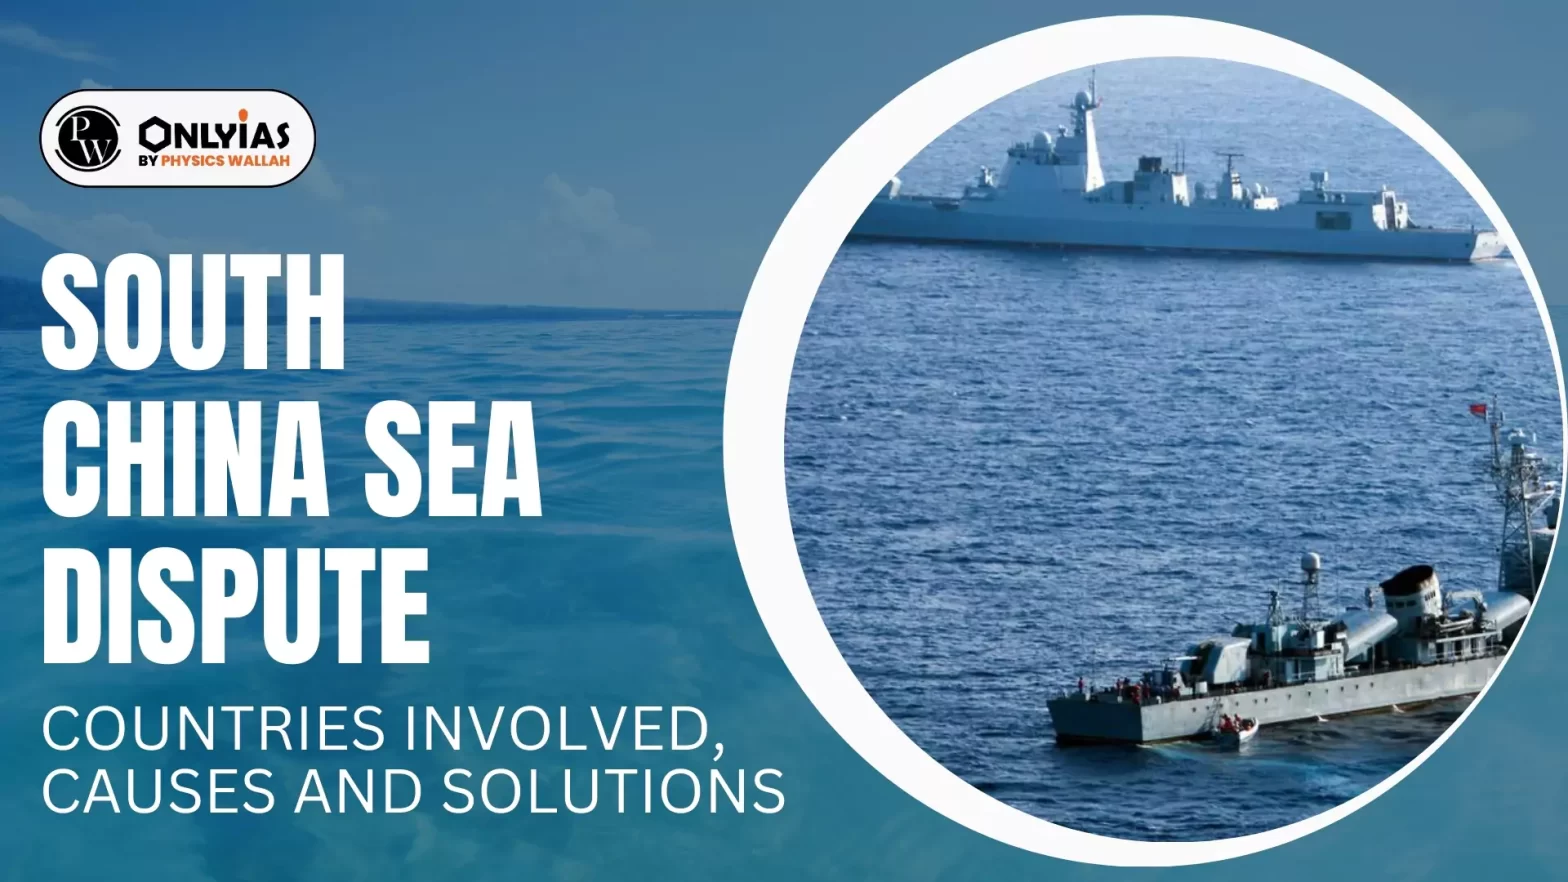 South China Sea Dispute: Countries Involved, Causes and Solutions